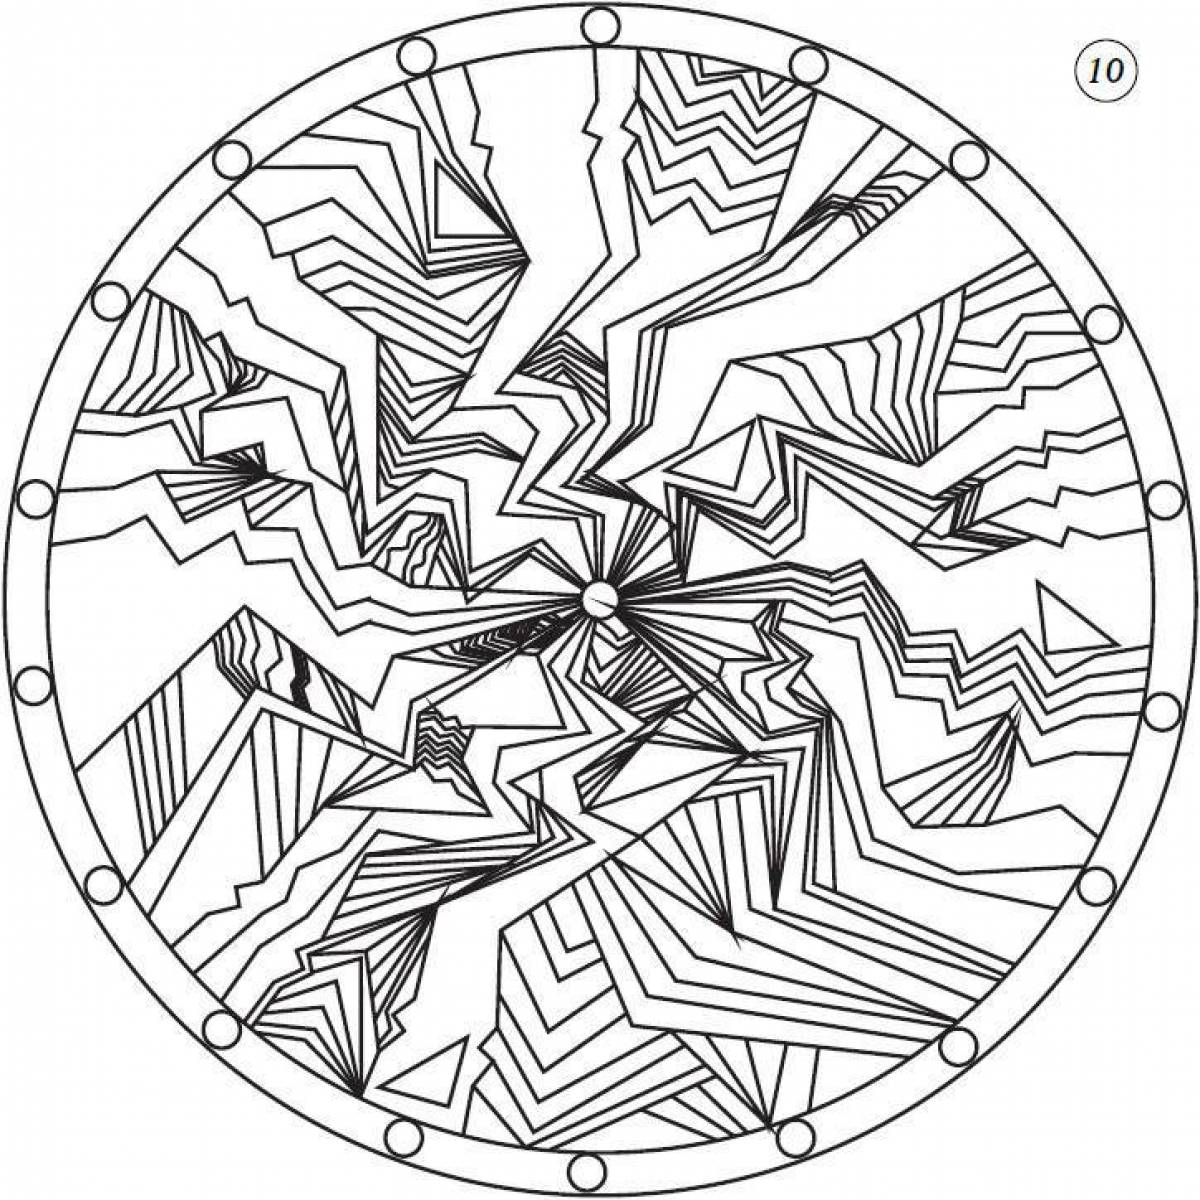 Radiant coloring page of a mandala with meaning